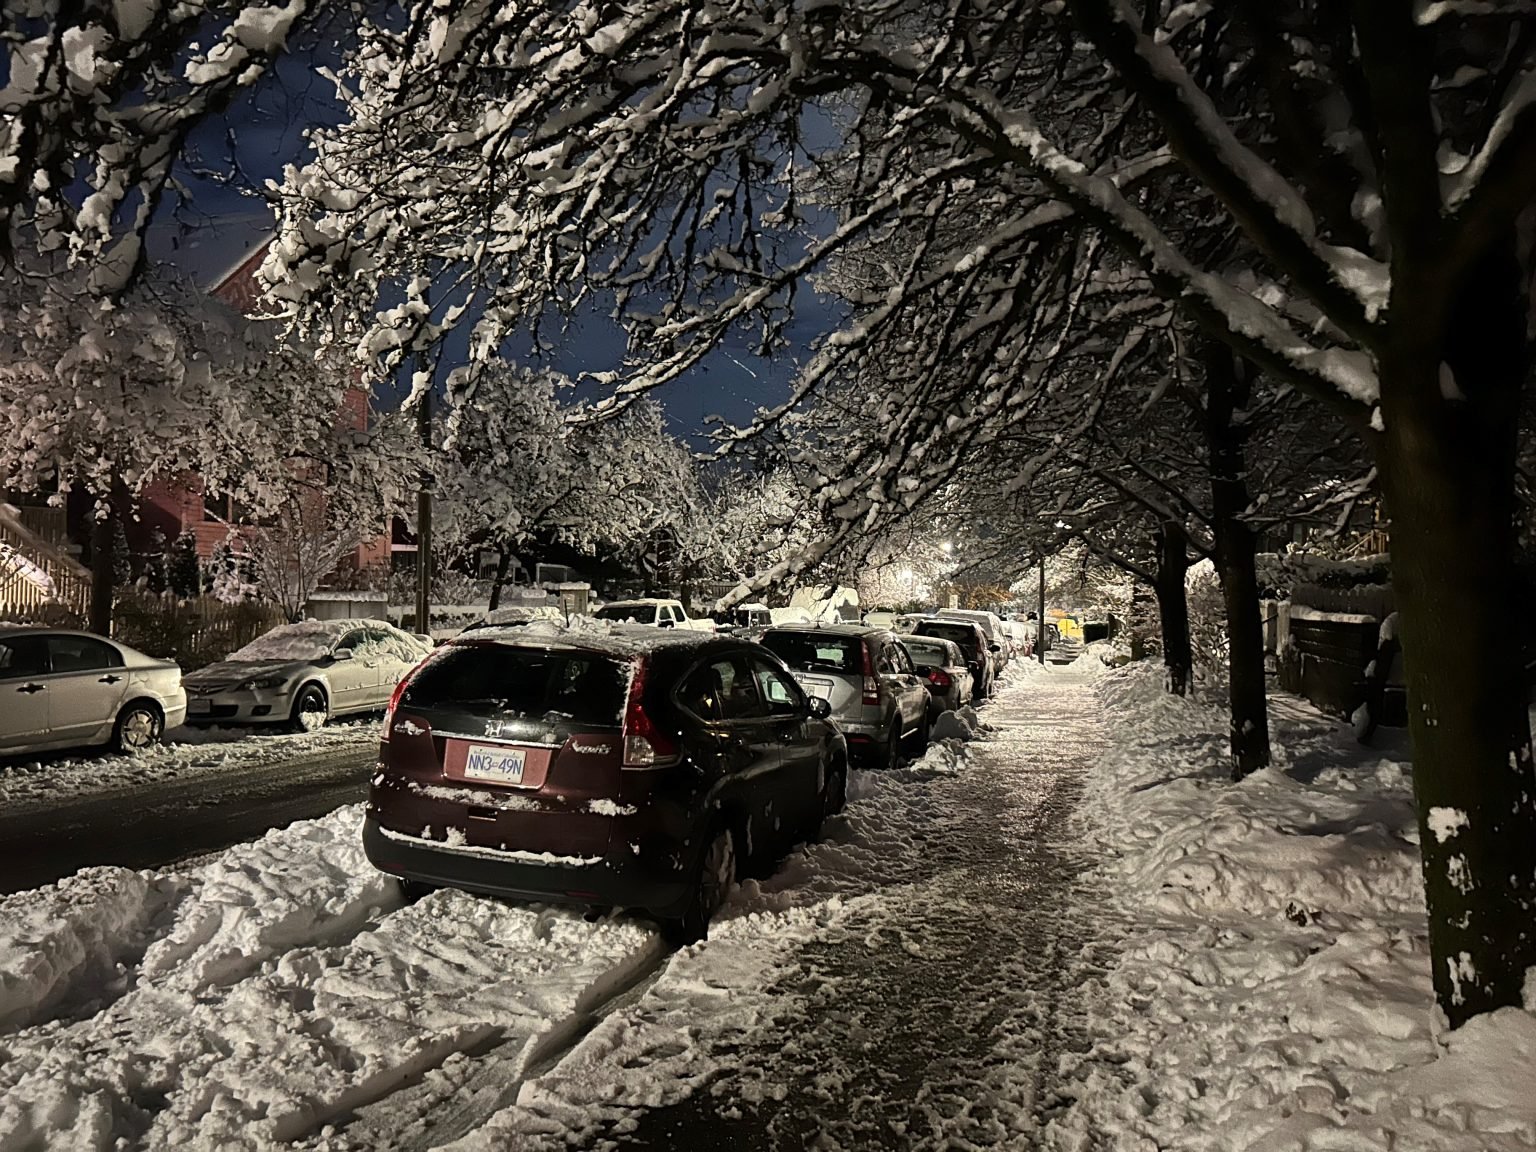 Lower Mainland cleans up after record-setting snowstorm hits region